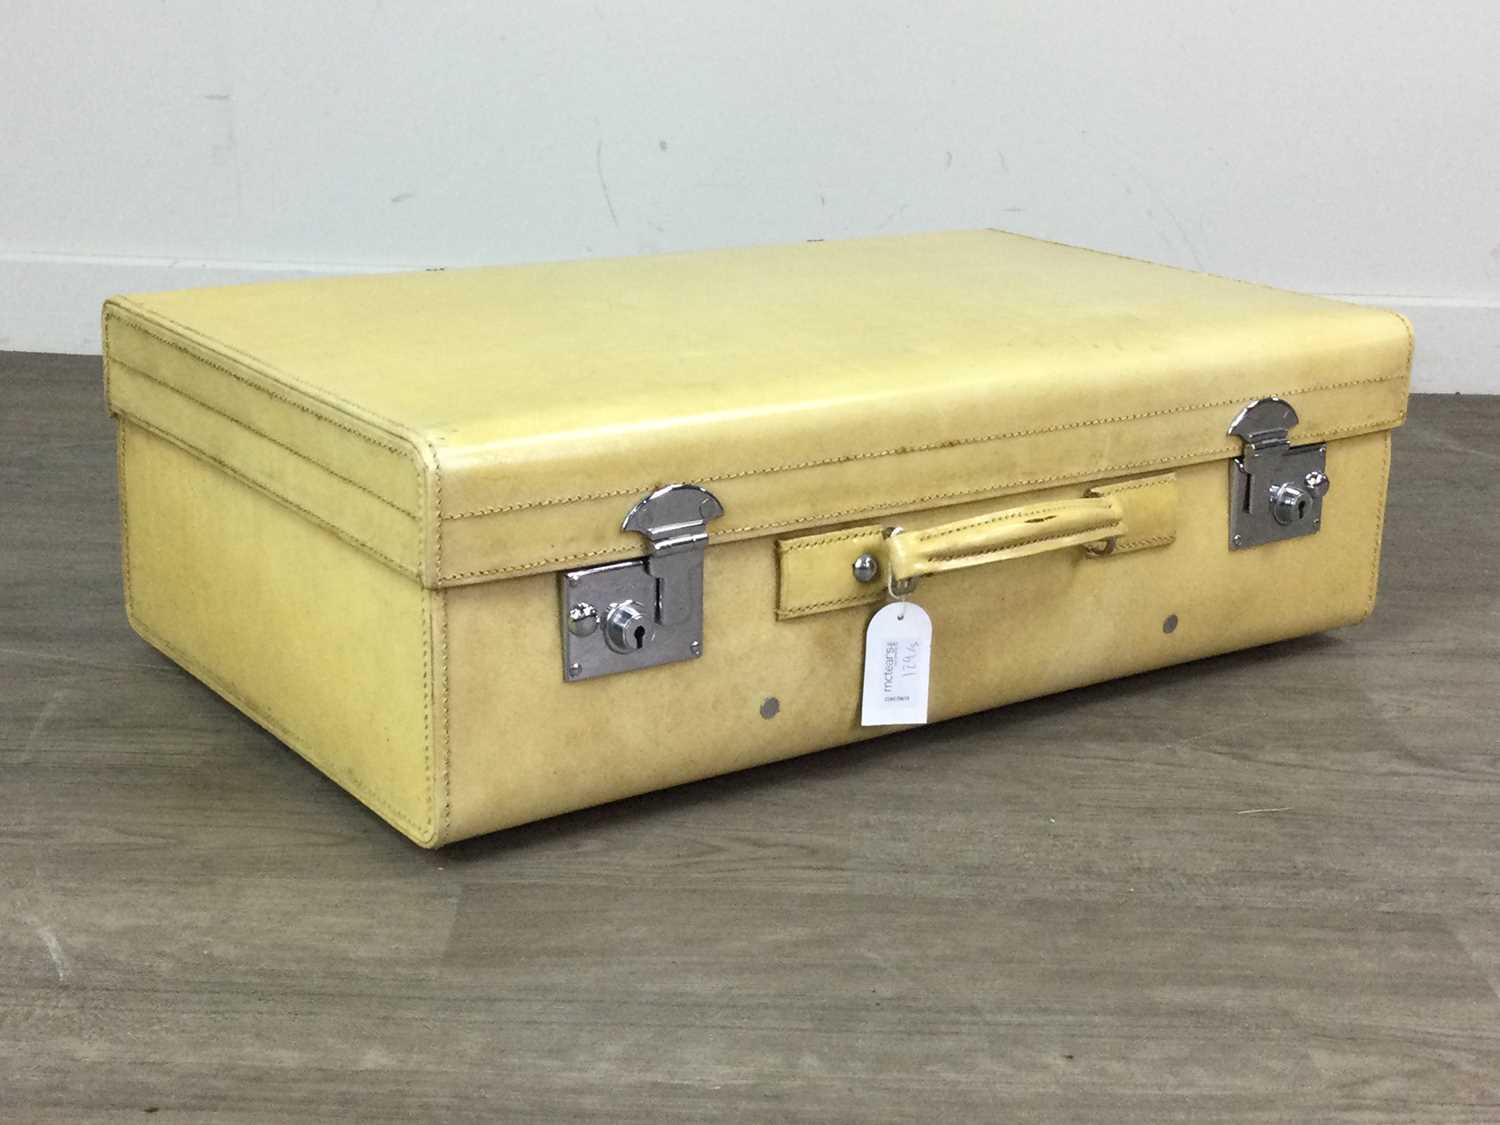 A VINTAGE VICTOR LUGGAGE HATBOX ALONG WITH TWO SUITCASES AND A TRAVEL CASE - Image 2 of 3